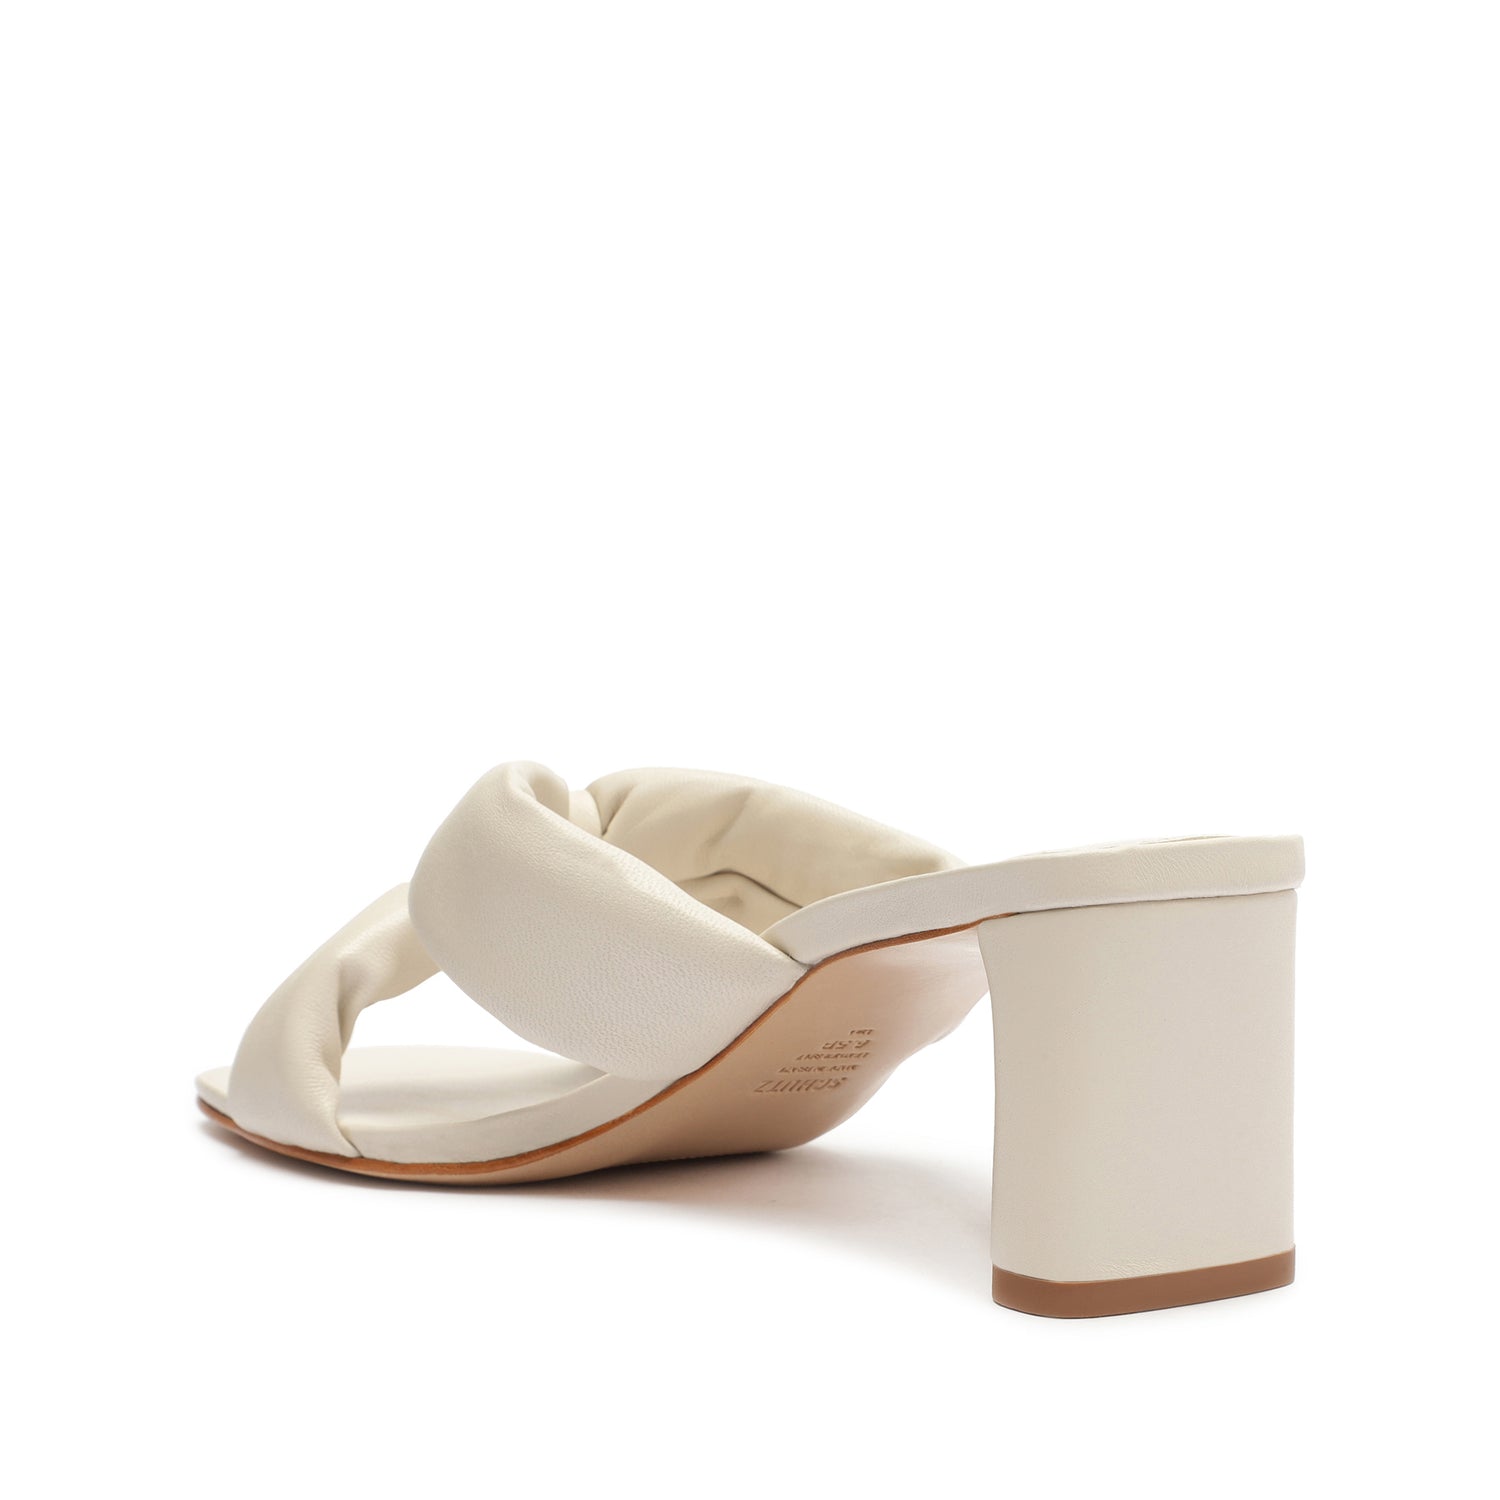 Fairy Mid Nappa Leather Sandal Sandals Open Stock    - Schutz Shoes